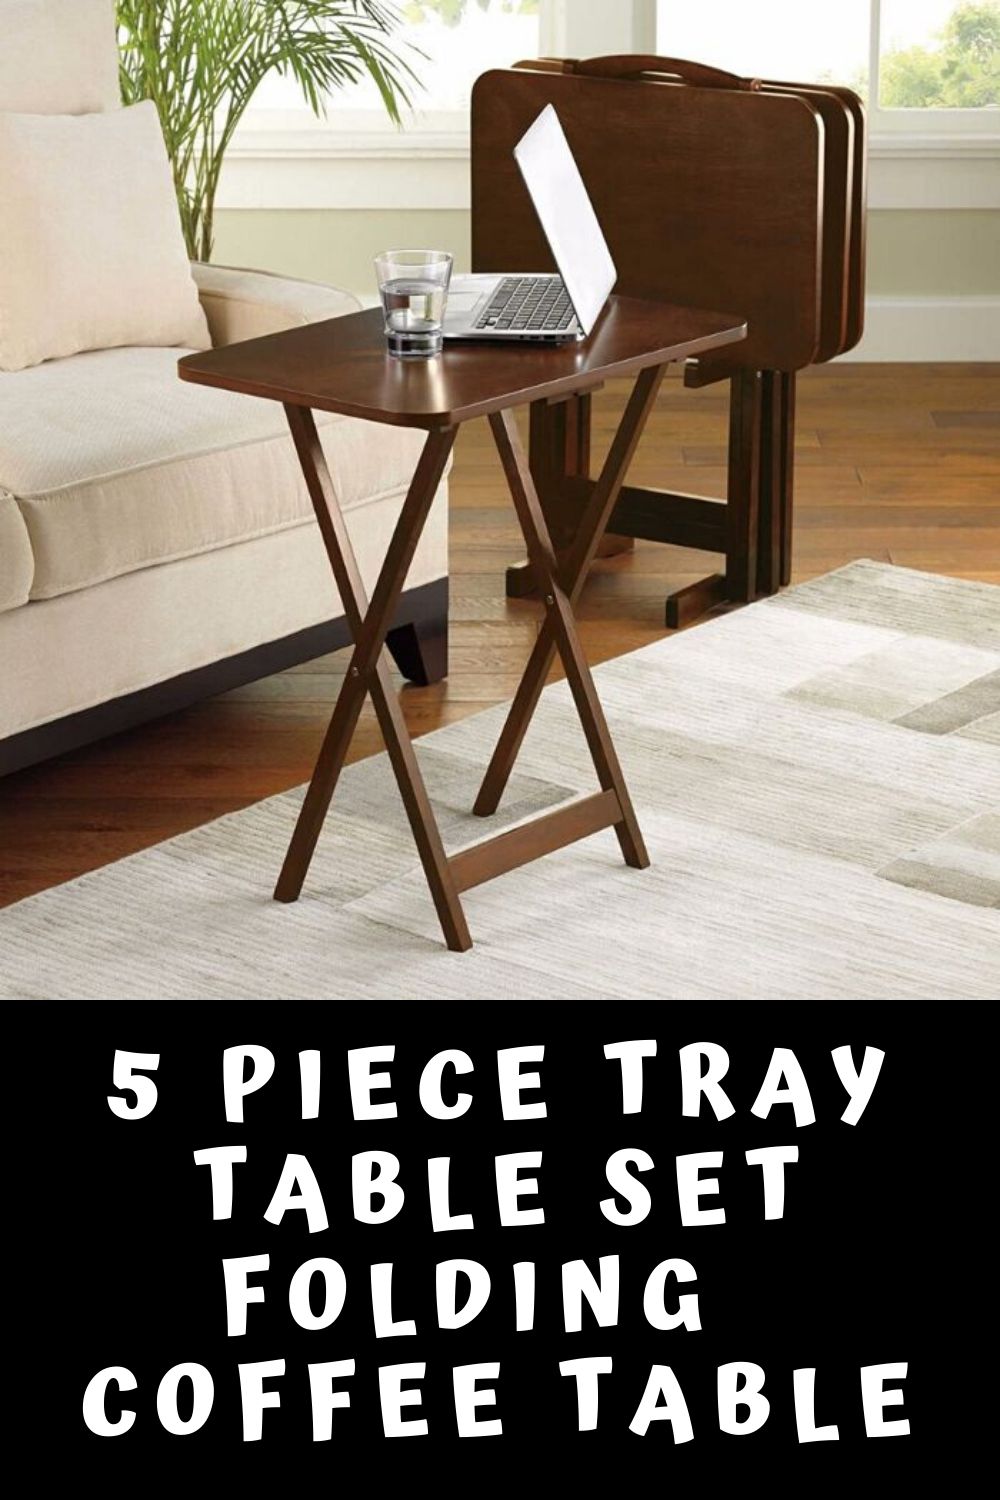 5 Piece Tray Table Set Folding Coffee Table In 2020 | Tray Throughout 5 Piece Coffee Tables (View 11 of 15)